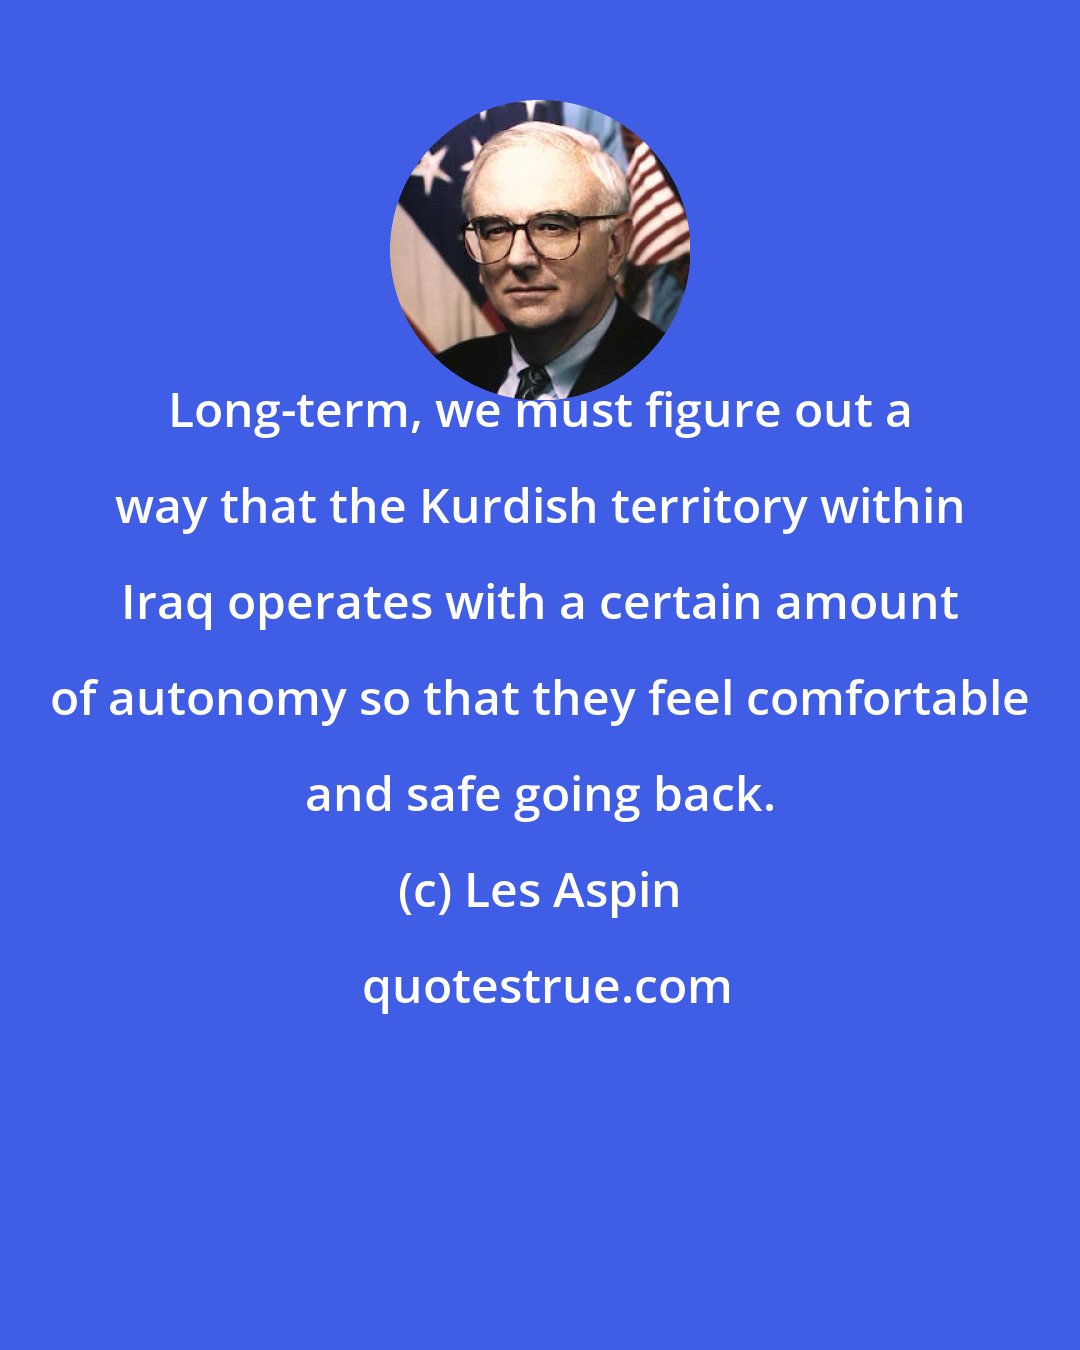 Les Aspin: Long-term, we must figure out a way that the Kurdish territory within Iraq operates with a certain amount of autonomy so that they feel comfortable and safe going back.